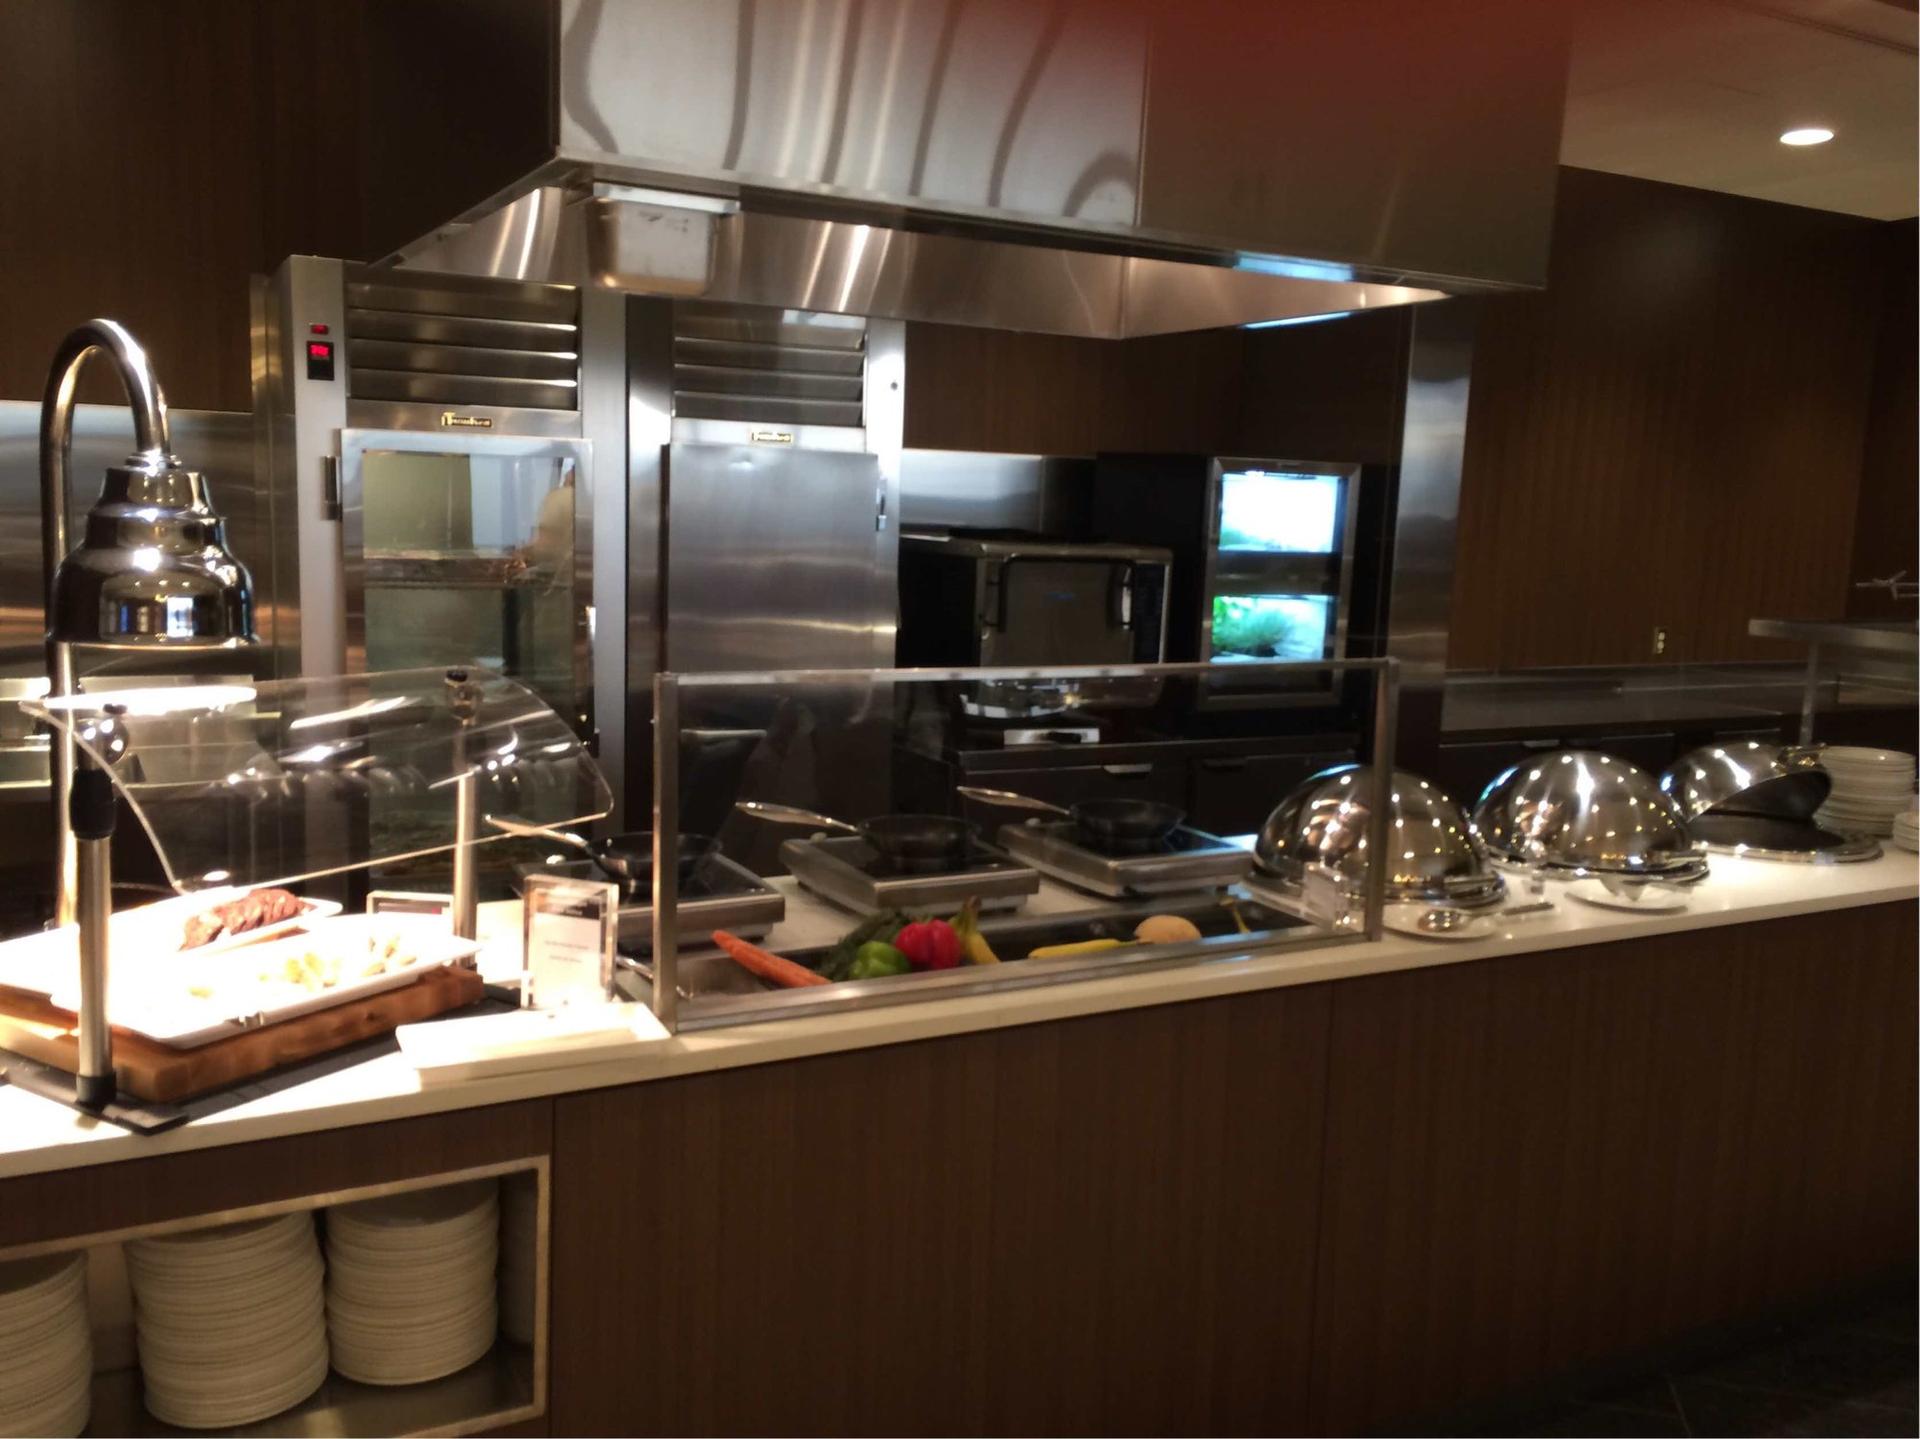 Air Canada Maple Leaf Lounge image 3 of 3